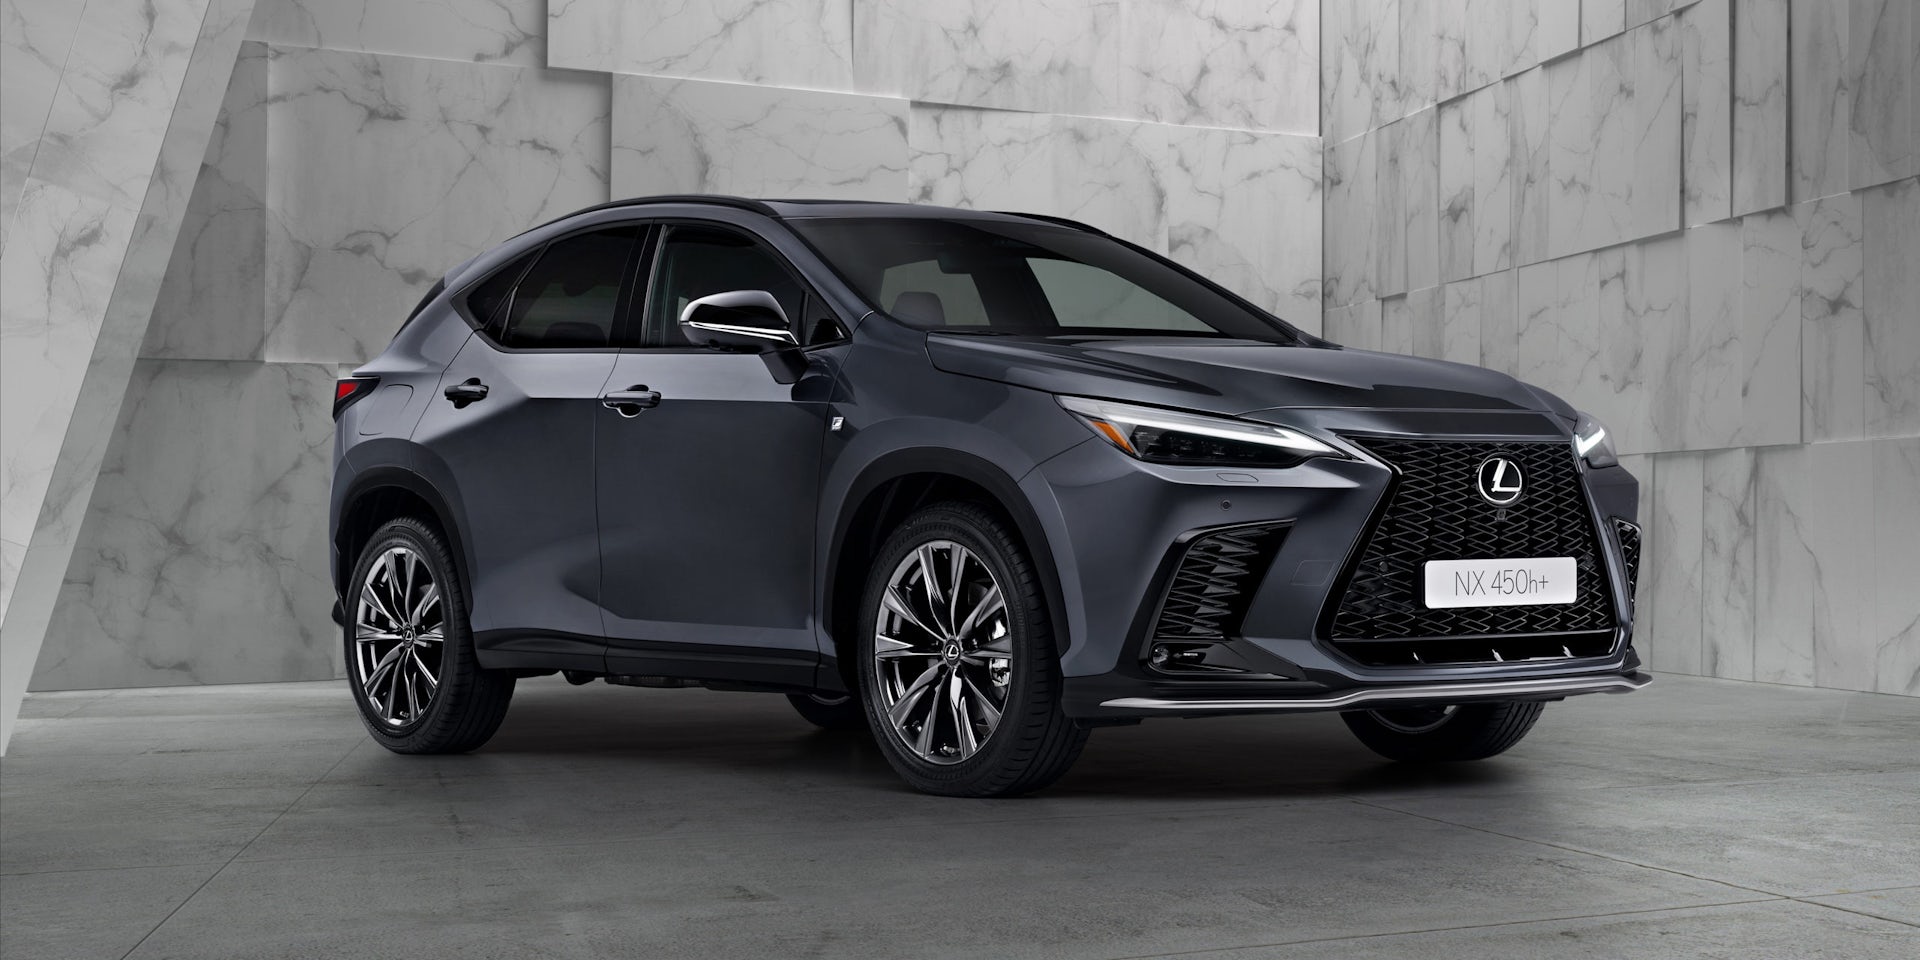 2022 Lexus Nx Revealed Price Specs And Release Date Carwow 2387